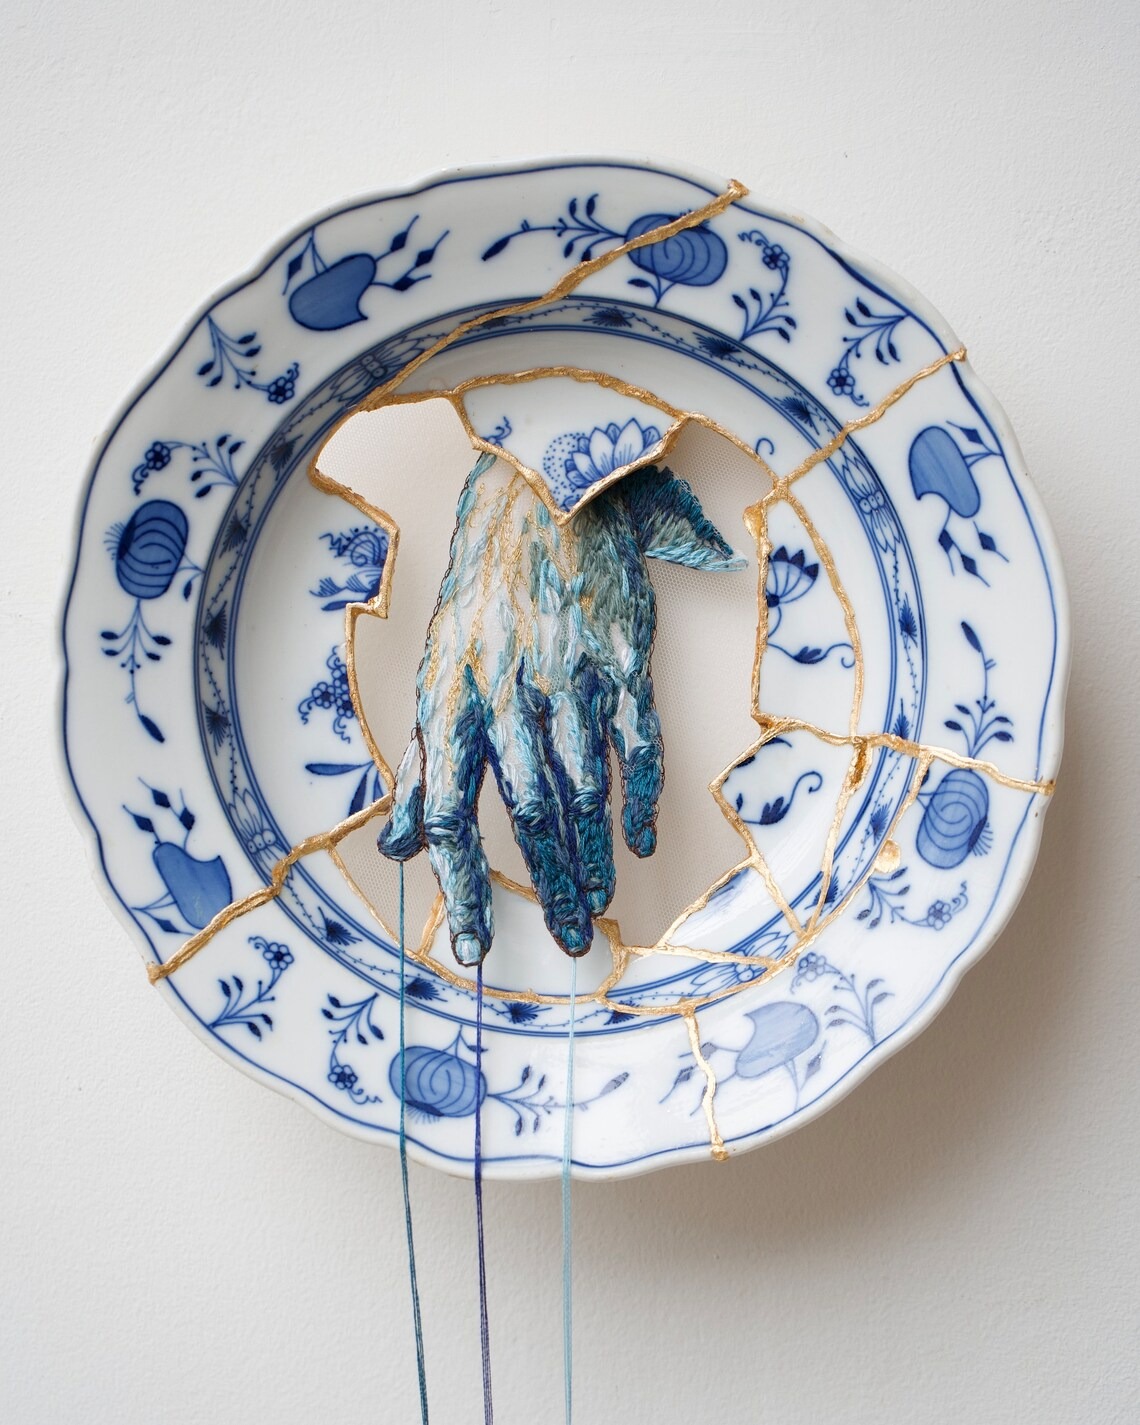 Embroidered Kintsugi, Delicate And Meaningful Mixed Media Artworks By Kathrin Marchenko (4)